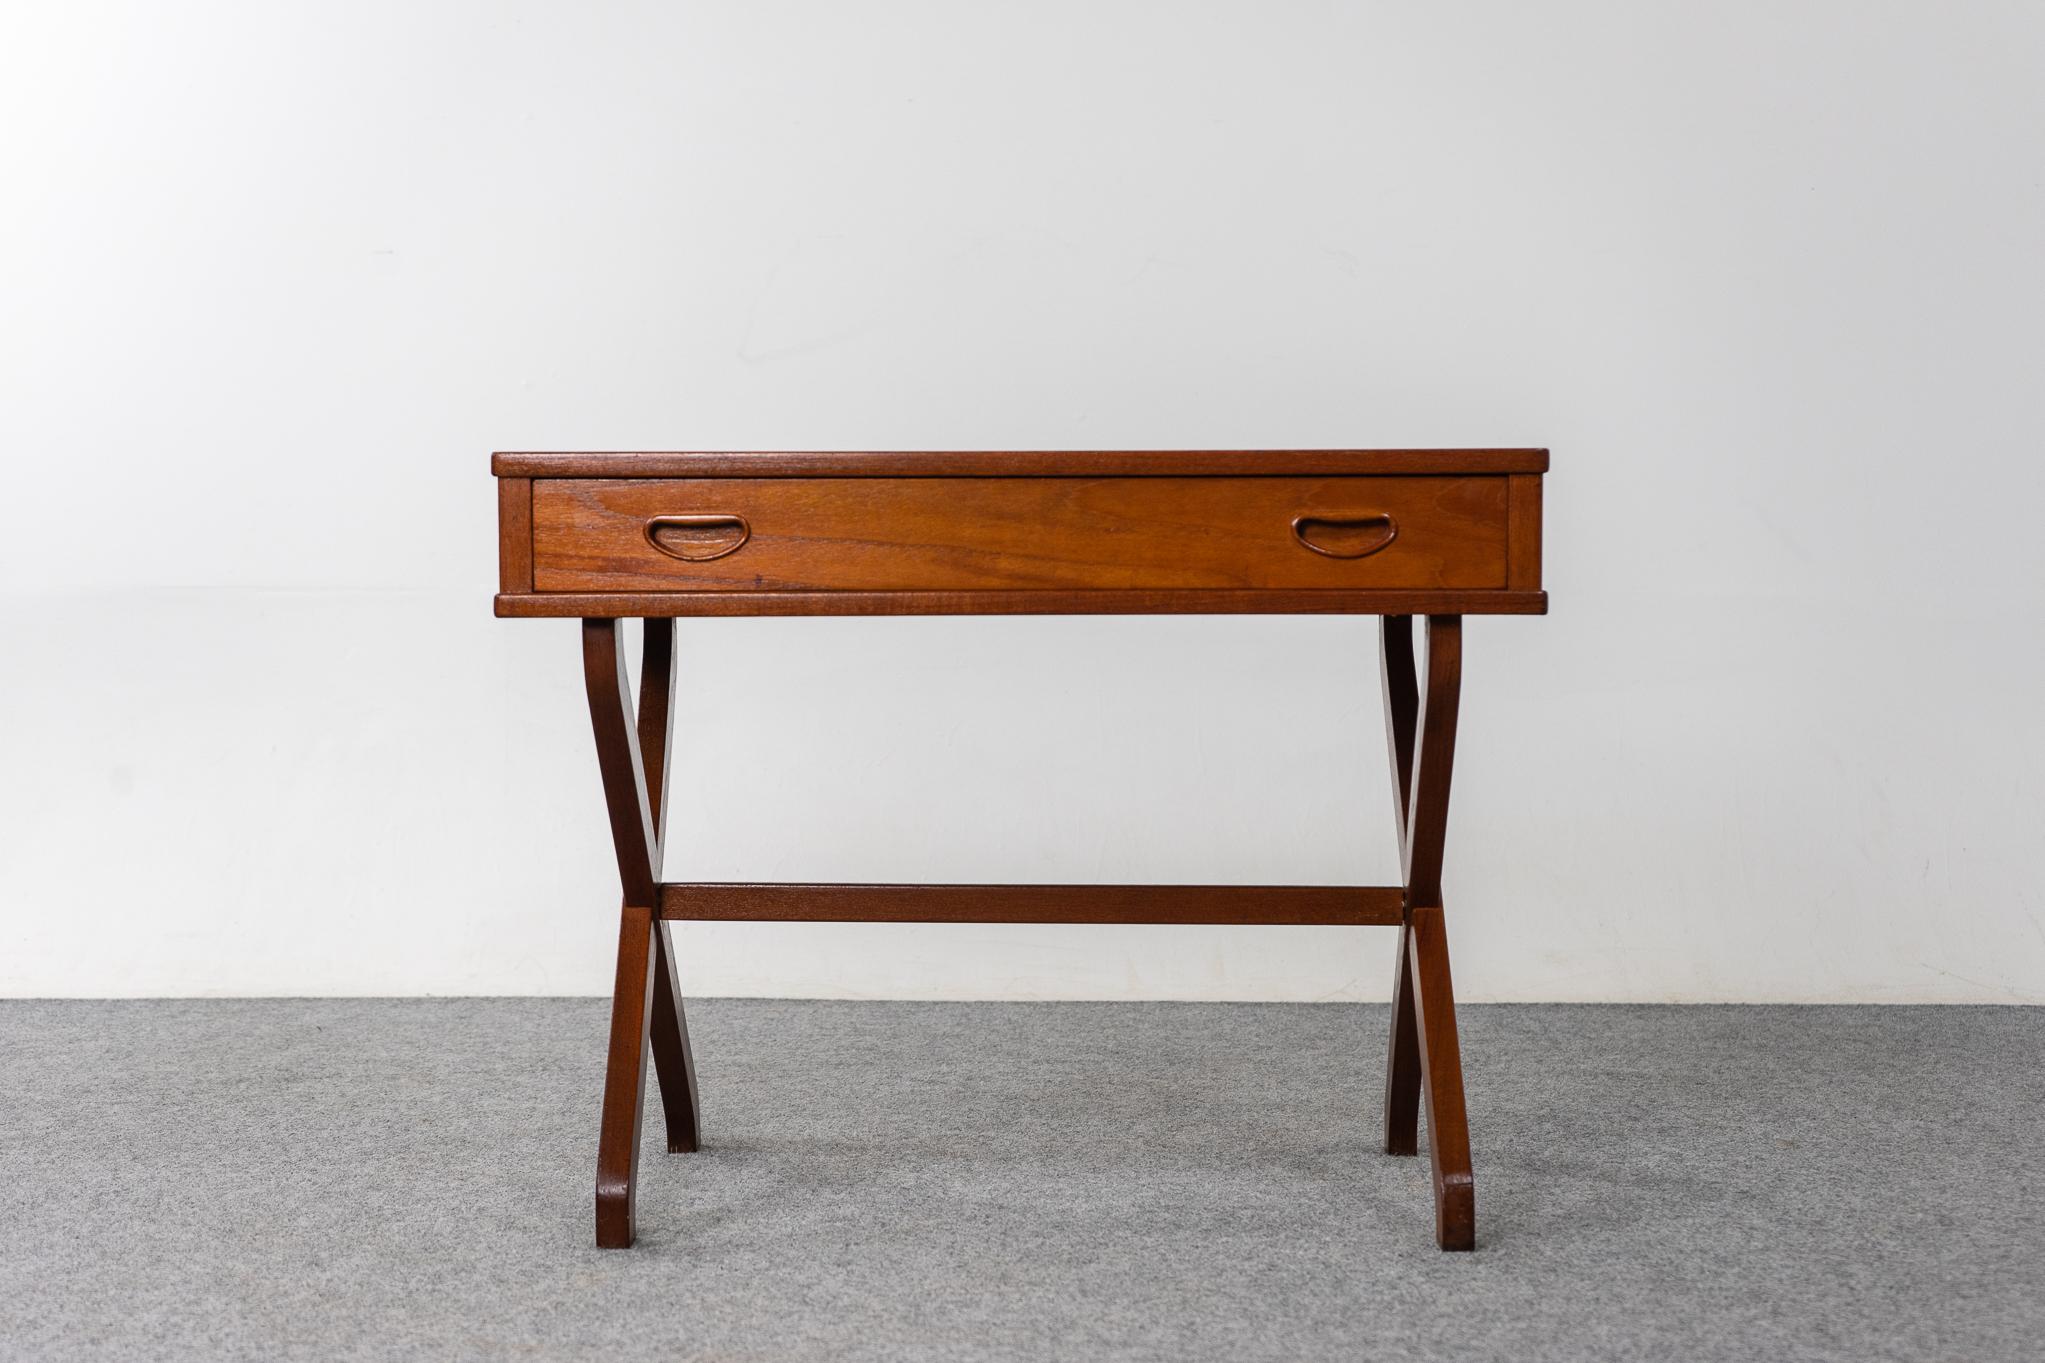 Teak Danish sewing/side table table, circa 1960's. Slim, elegant table with charming X legs and support bar. Lovely 